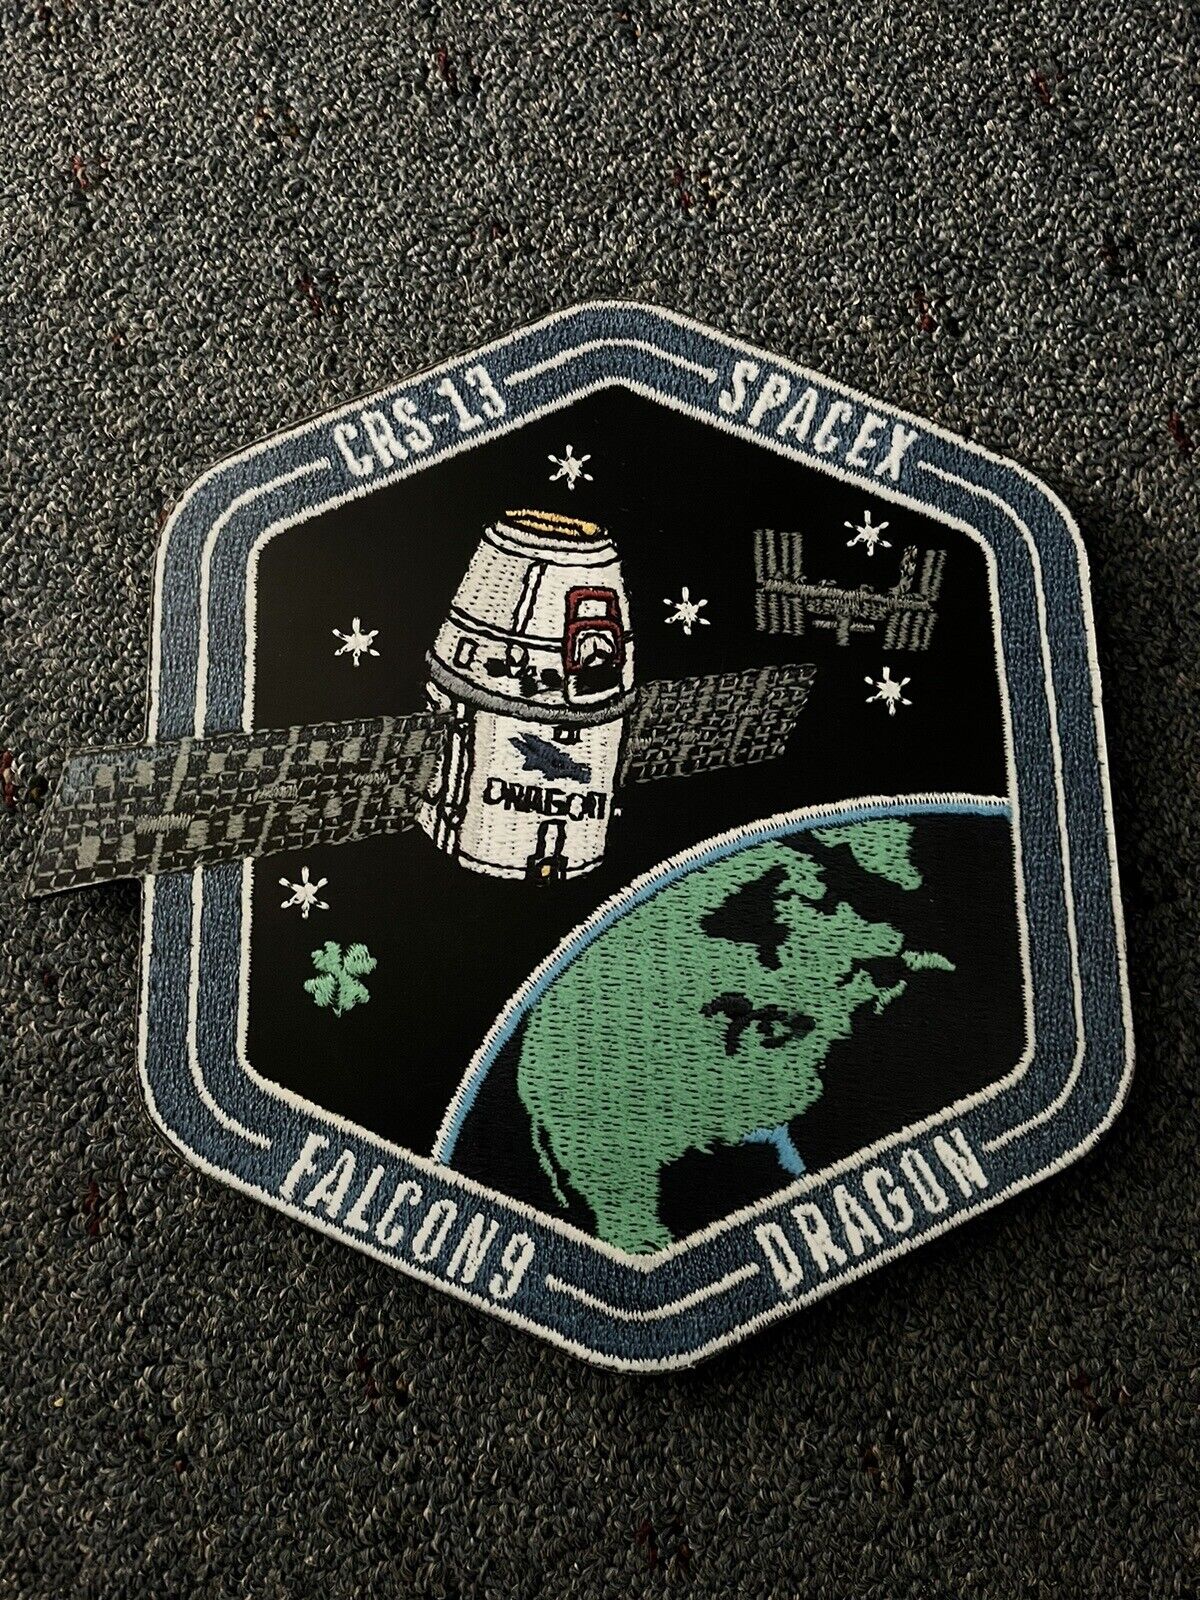 Space X Wall Sign / Patch Sign / Falcon 9 Dragon capsule